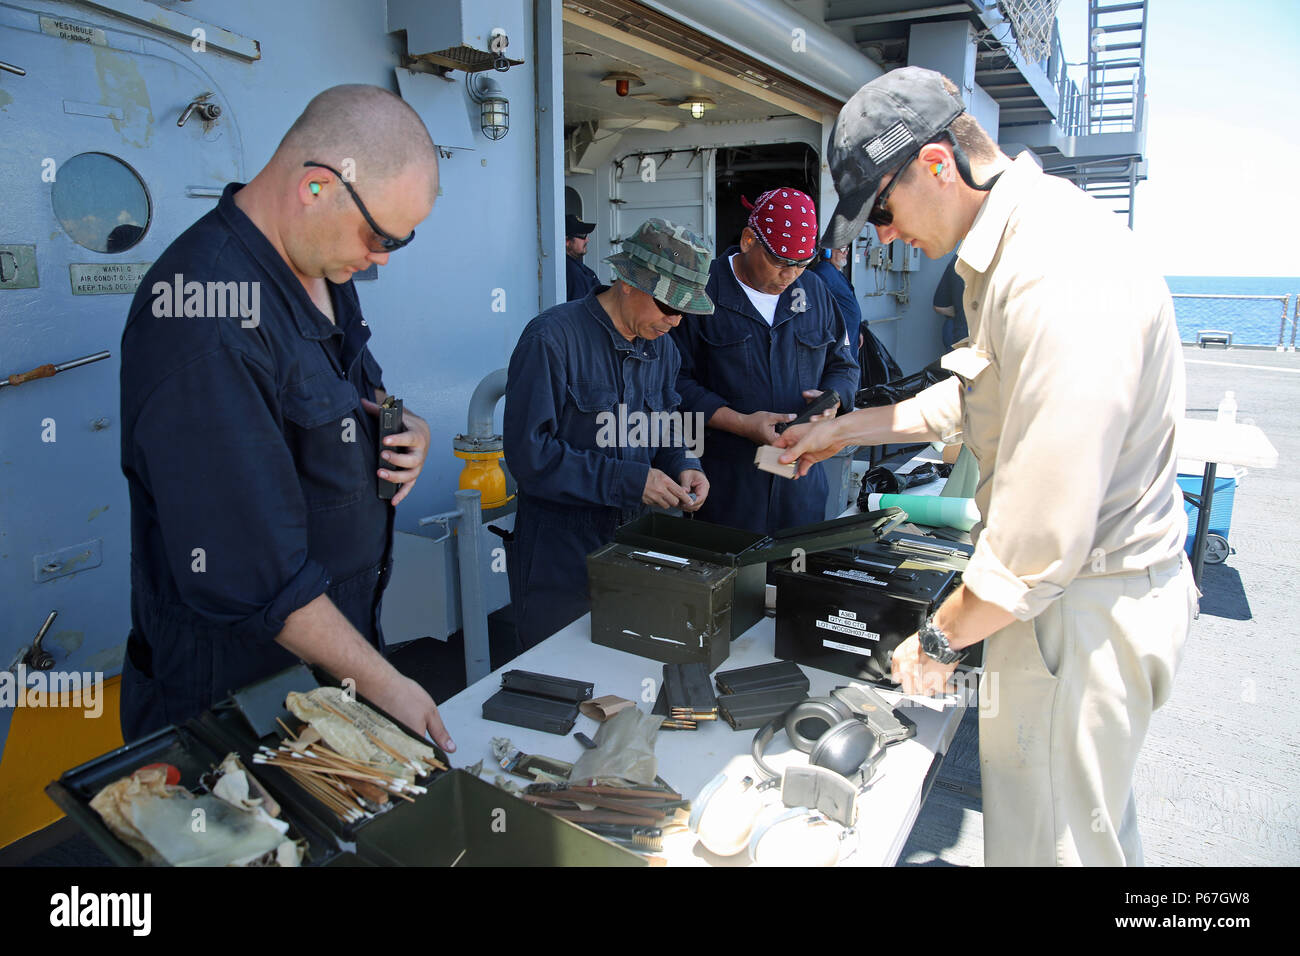 160509-N-IX266-012 SOUTH CHINA SEA—Civilian mariners Robert J. Blandford (right), chief mate aboard the fleet replenishment oiler USNS John Ericsson (T-AO 194) and Christopher Athanas, ordinary seaman (left), inventory ammunition prior to a small-arms weapons qualification course here, May 5. (U.S. Navy photo by Grady T. Fontana/Released) Stock Photo